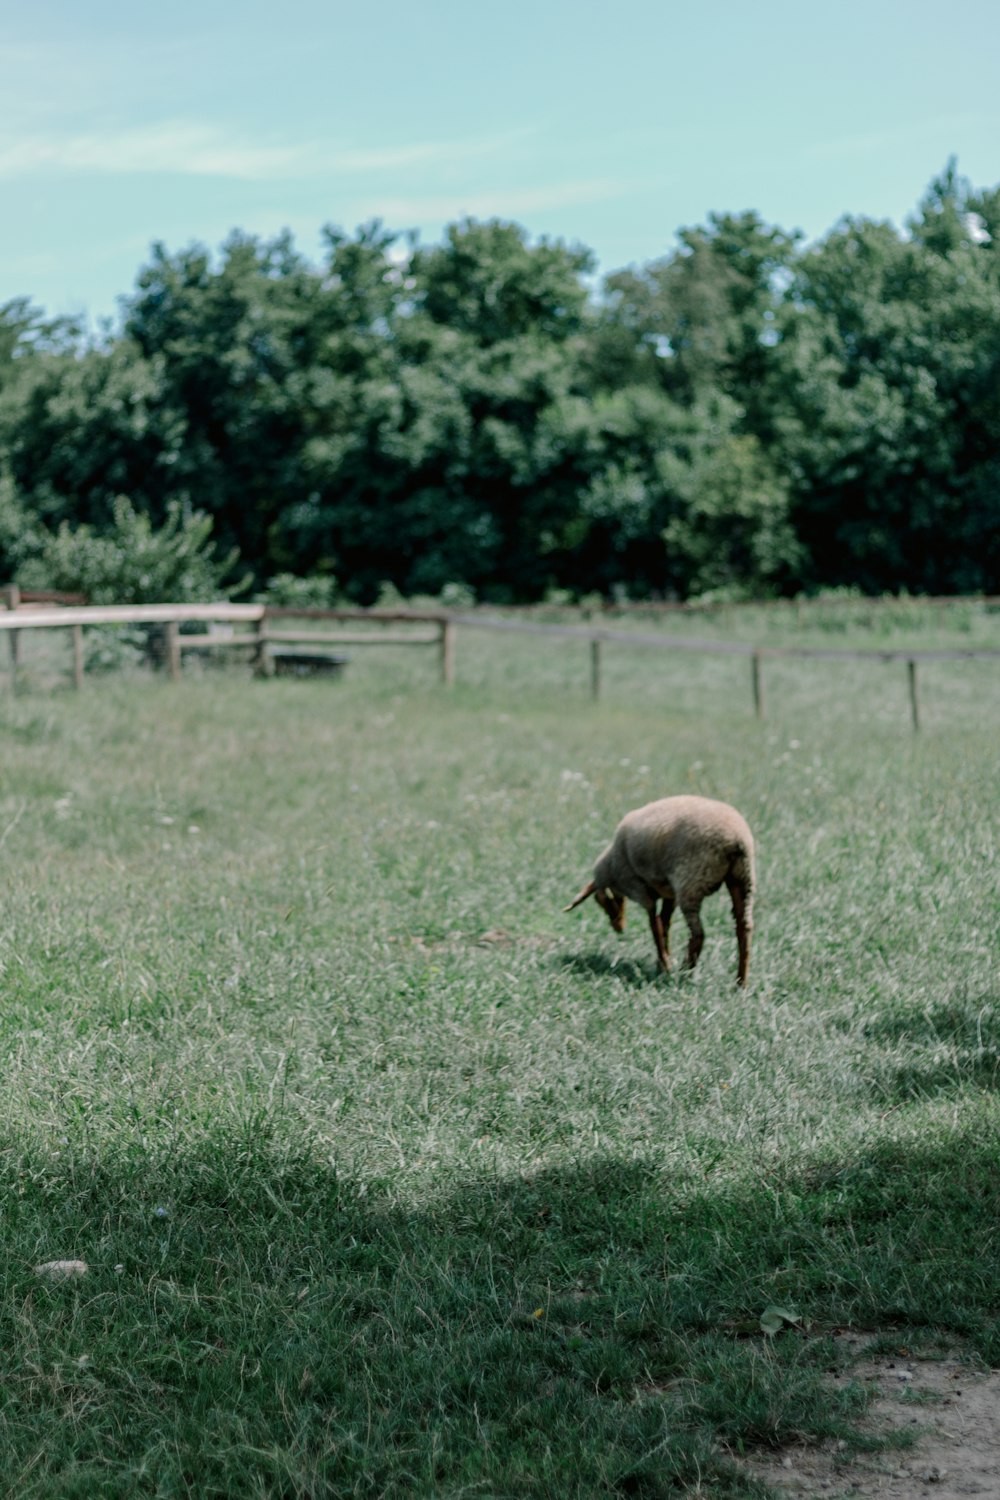 a sheep grazes in a field with trees in the background